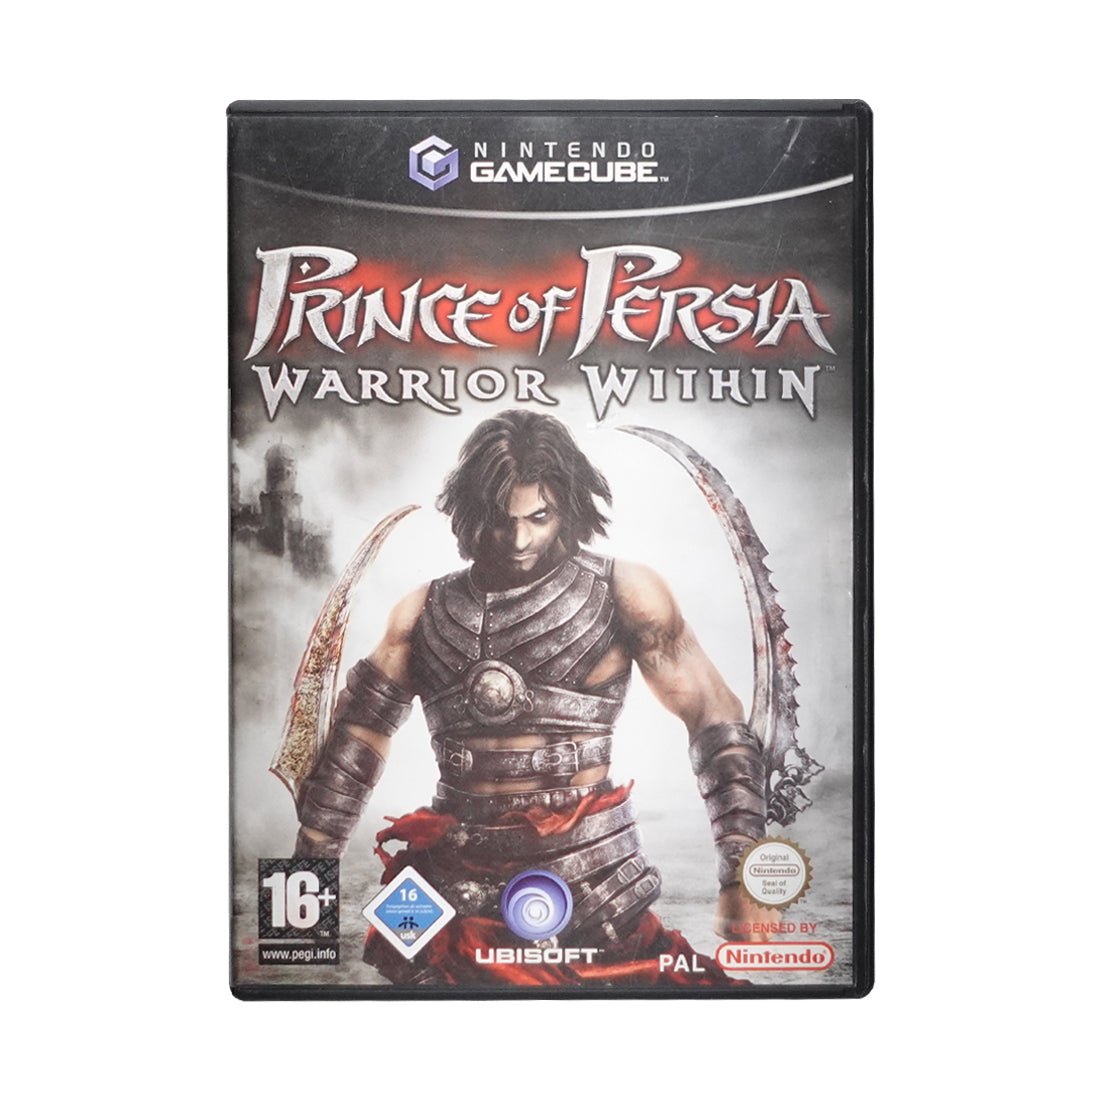 (Pre-Owned) Prince of Persia: Warrior Within - Nintendo Gamecube - Store 974 | ستور ٩٧٤